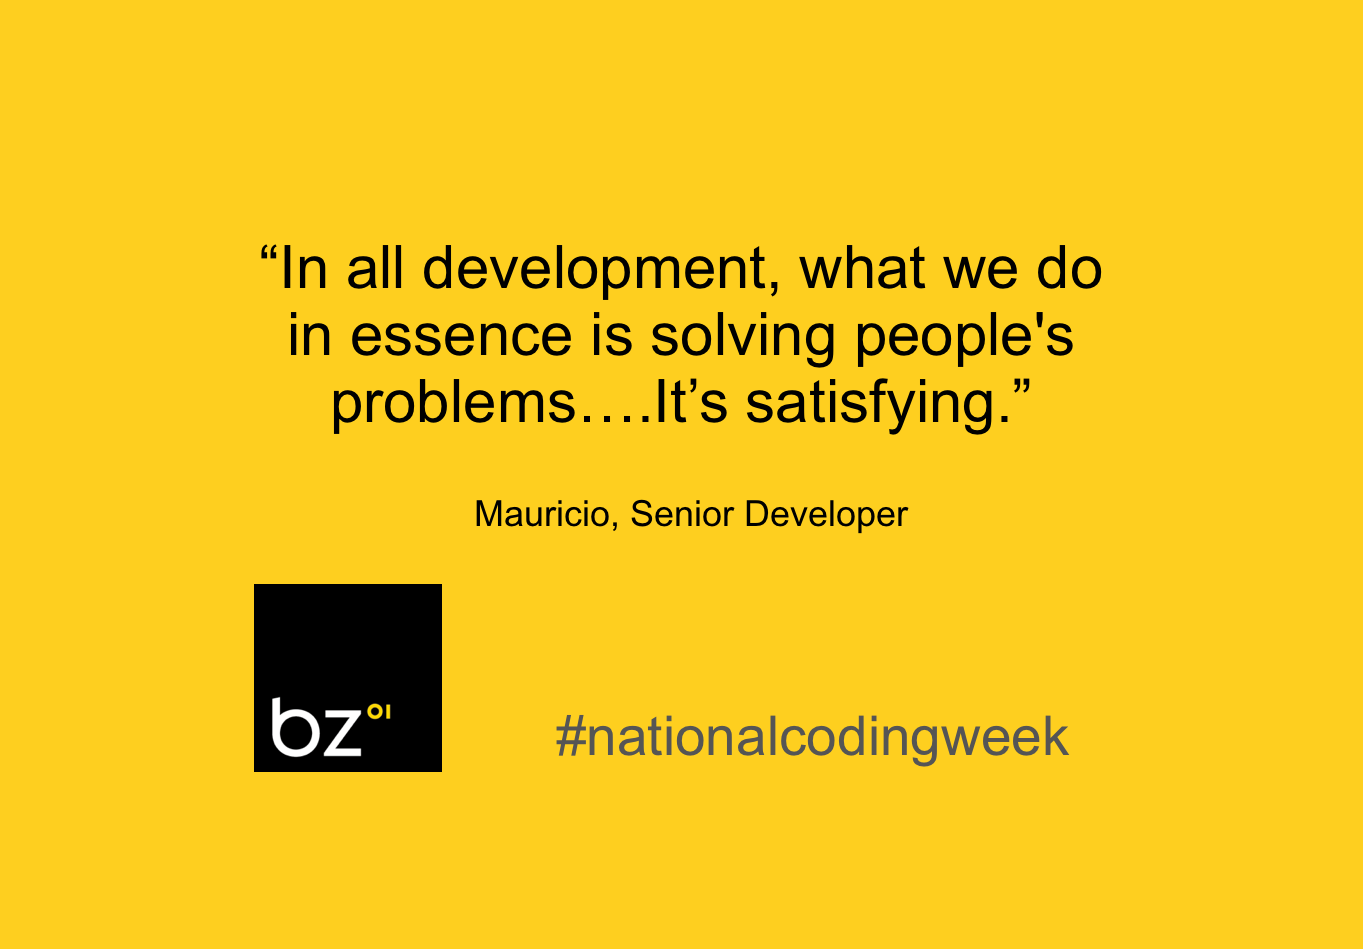 "In all development, what we do in essence is solving people's problems...It's satisfying."